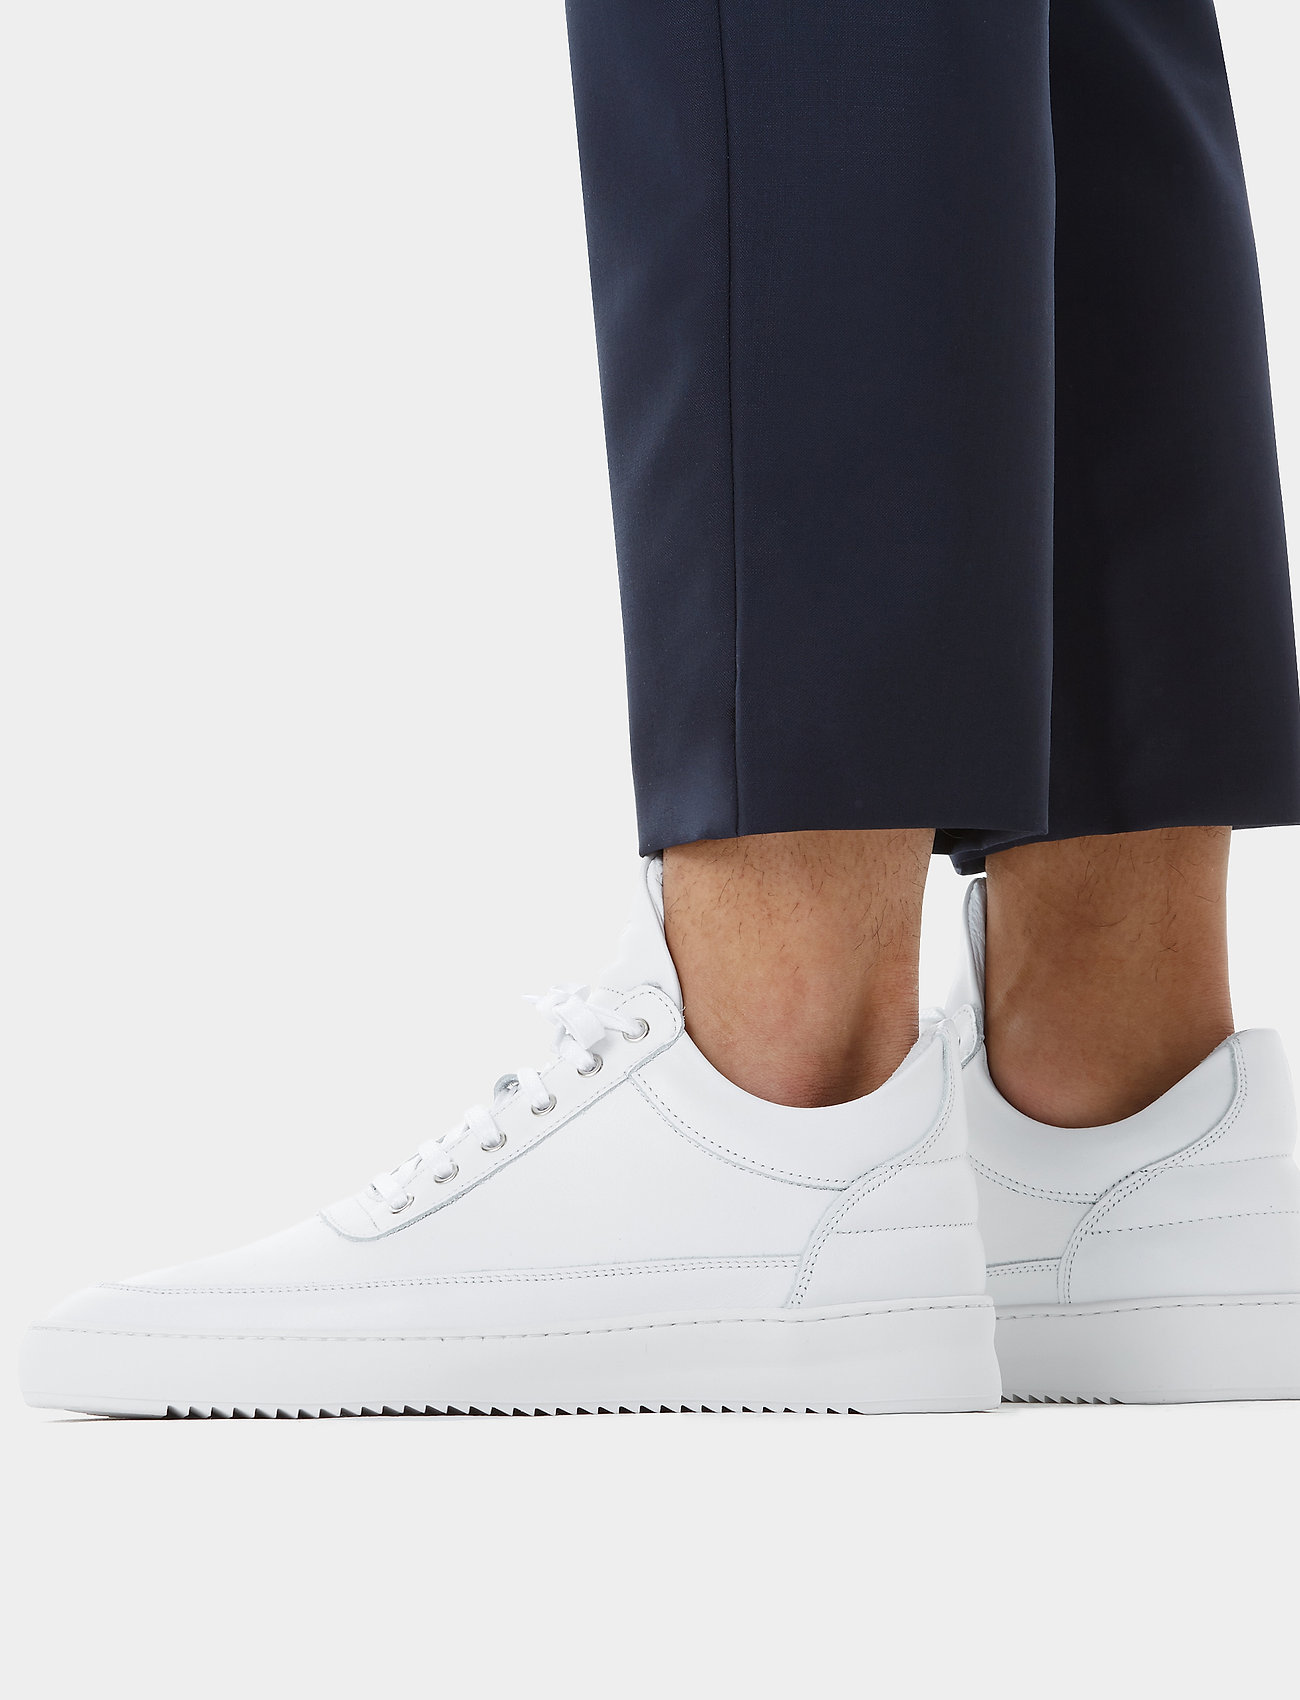 Filling Pieces - Low Top Ripple Nappa All White - lave sneakers - white - 0